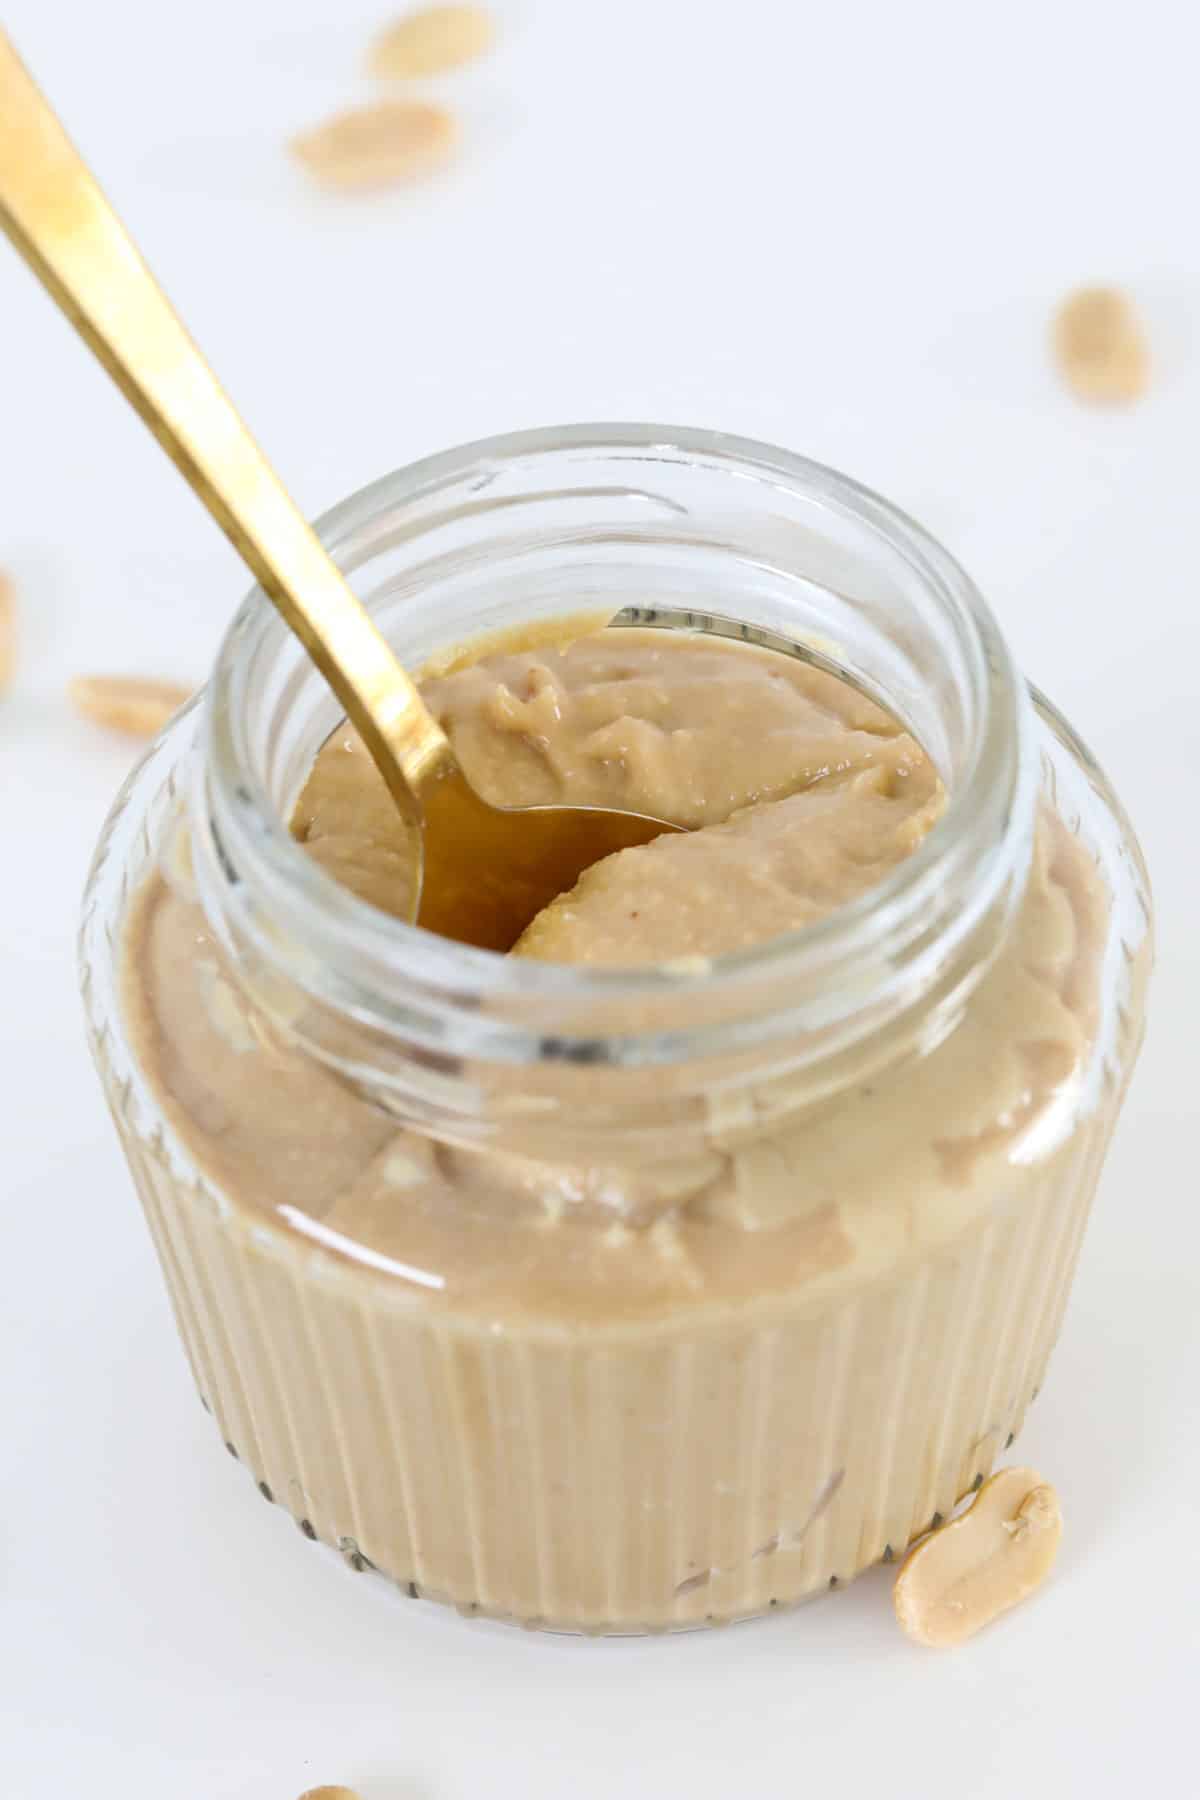 A gold spoon in a jar of homemade peanut butter.